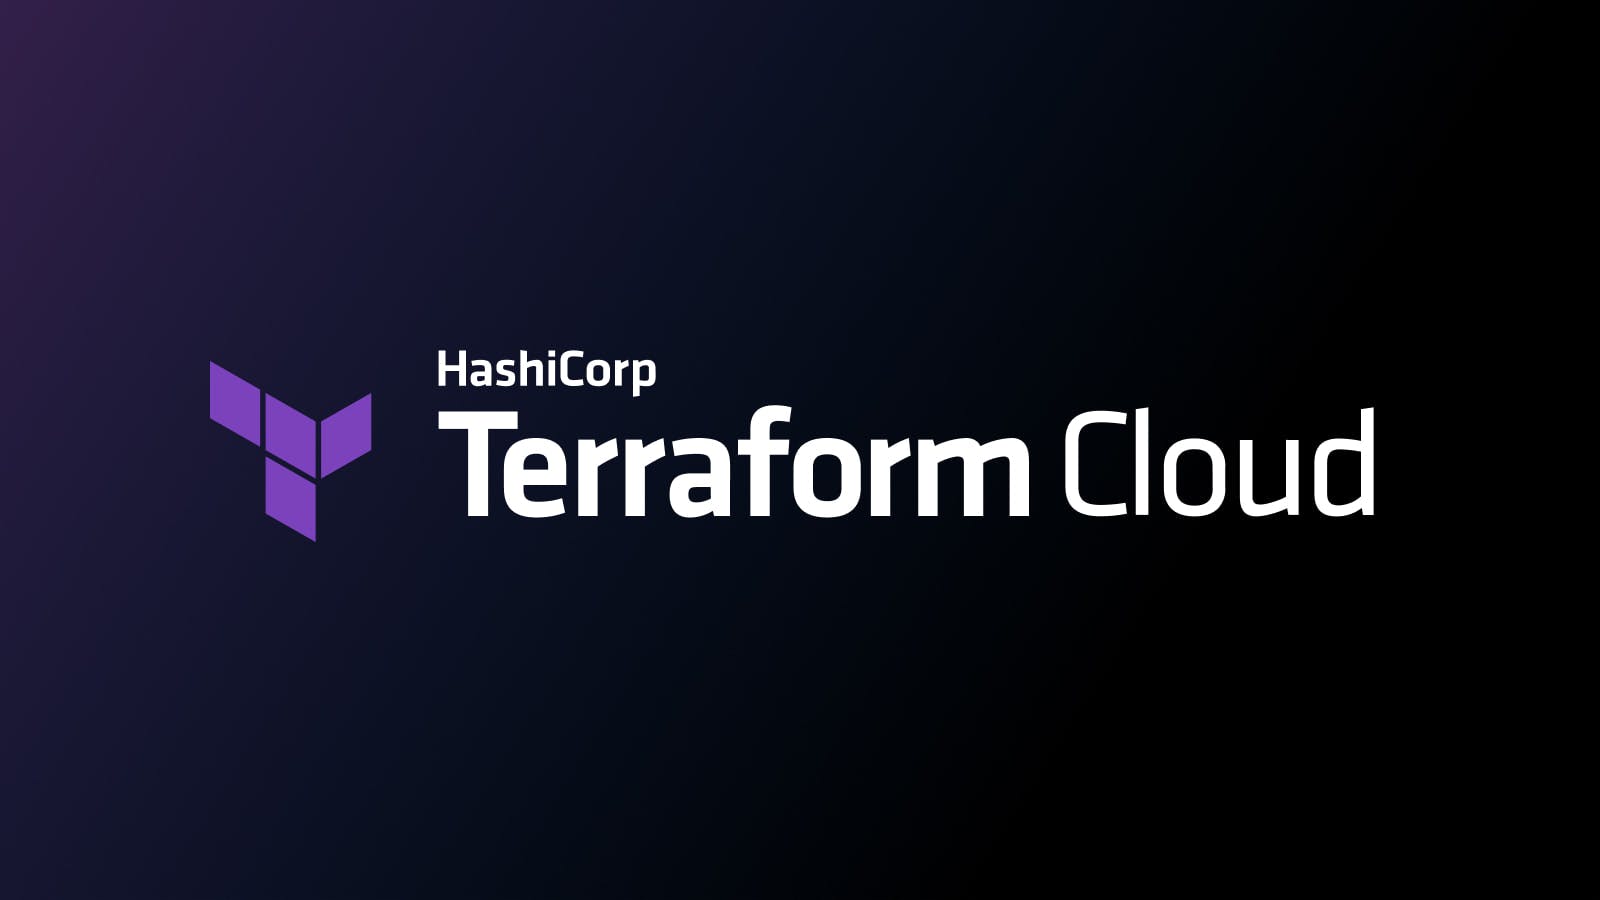 Terraform Cloud adds on-demand policy evaluation